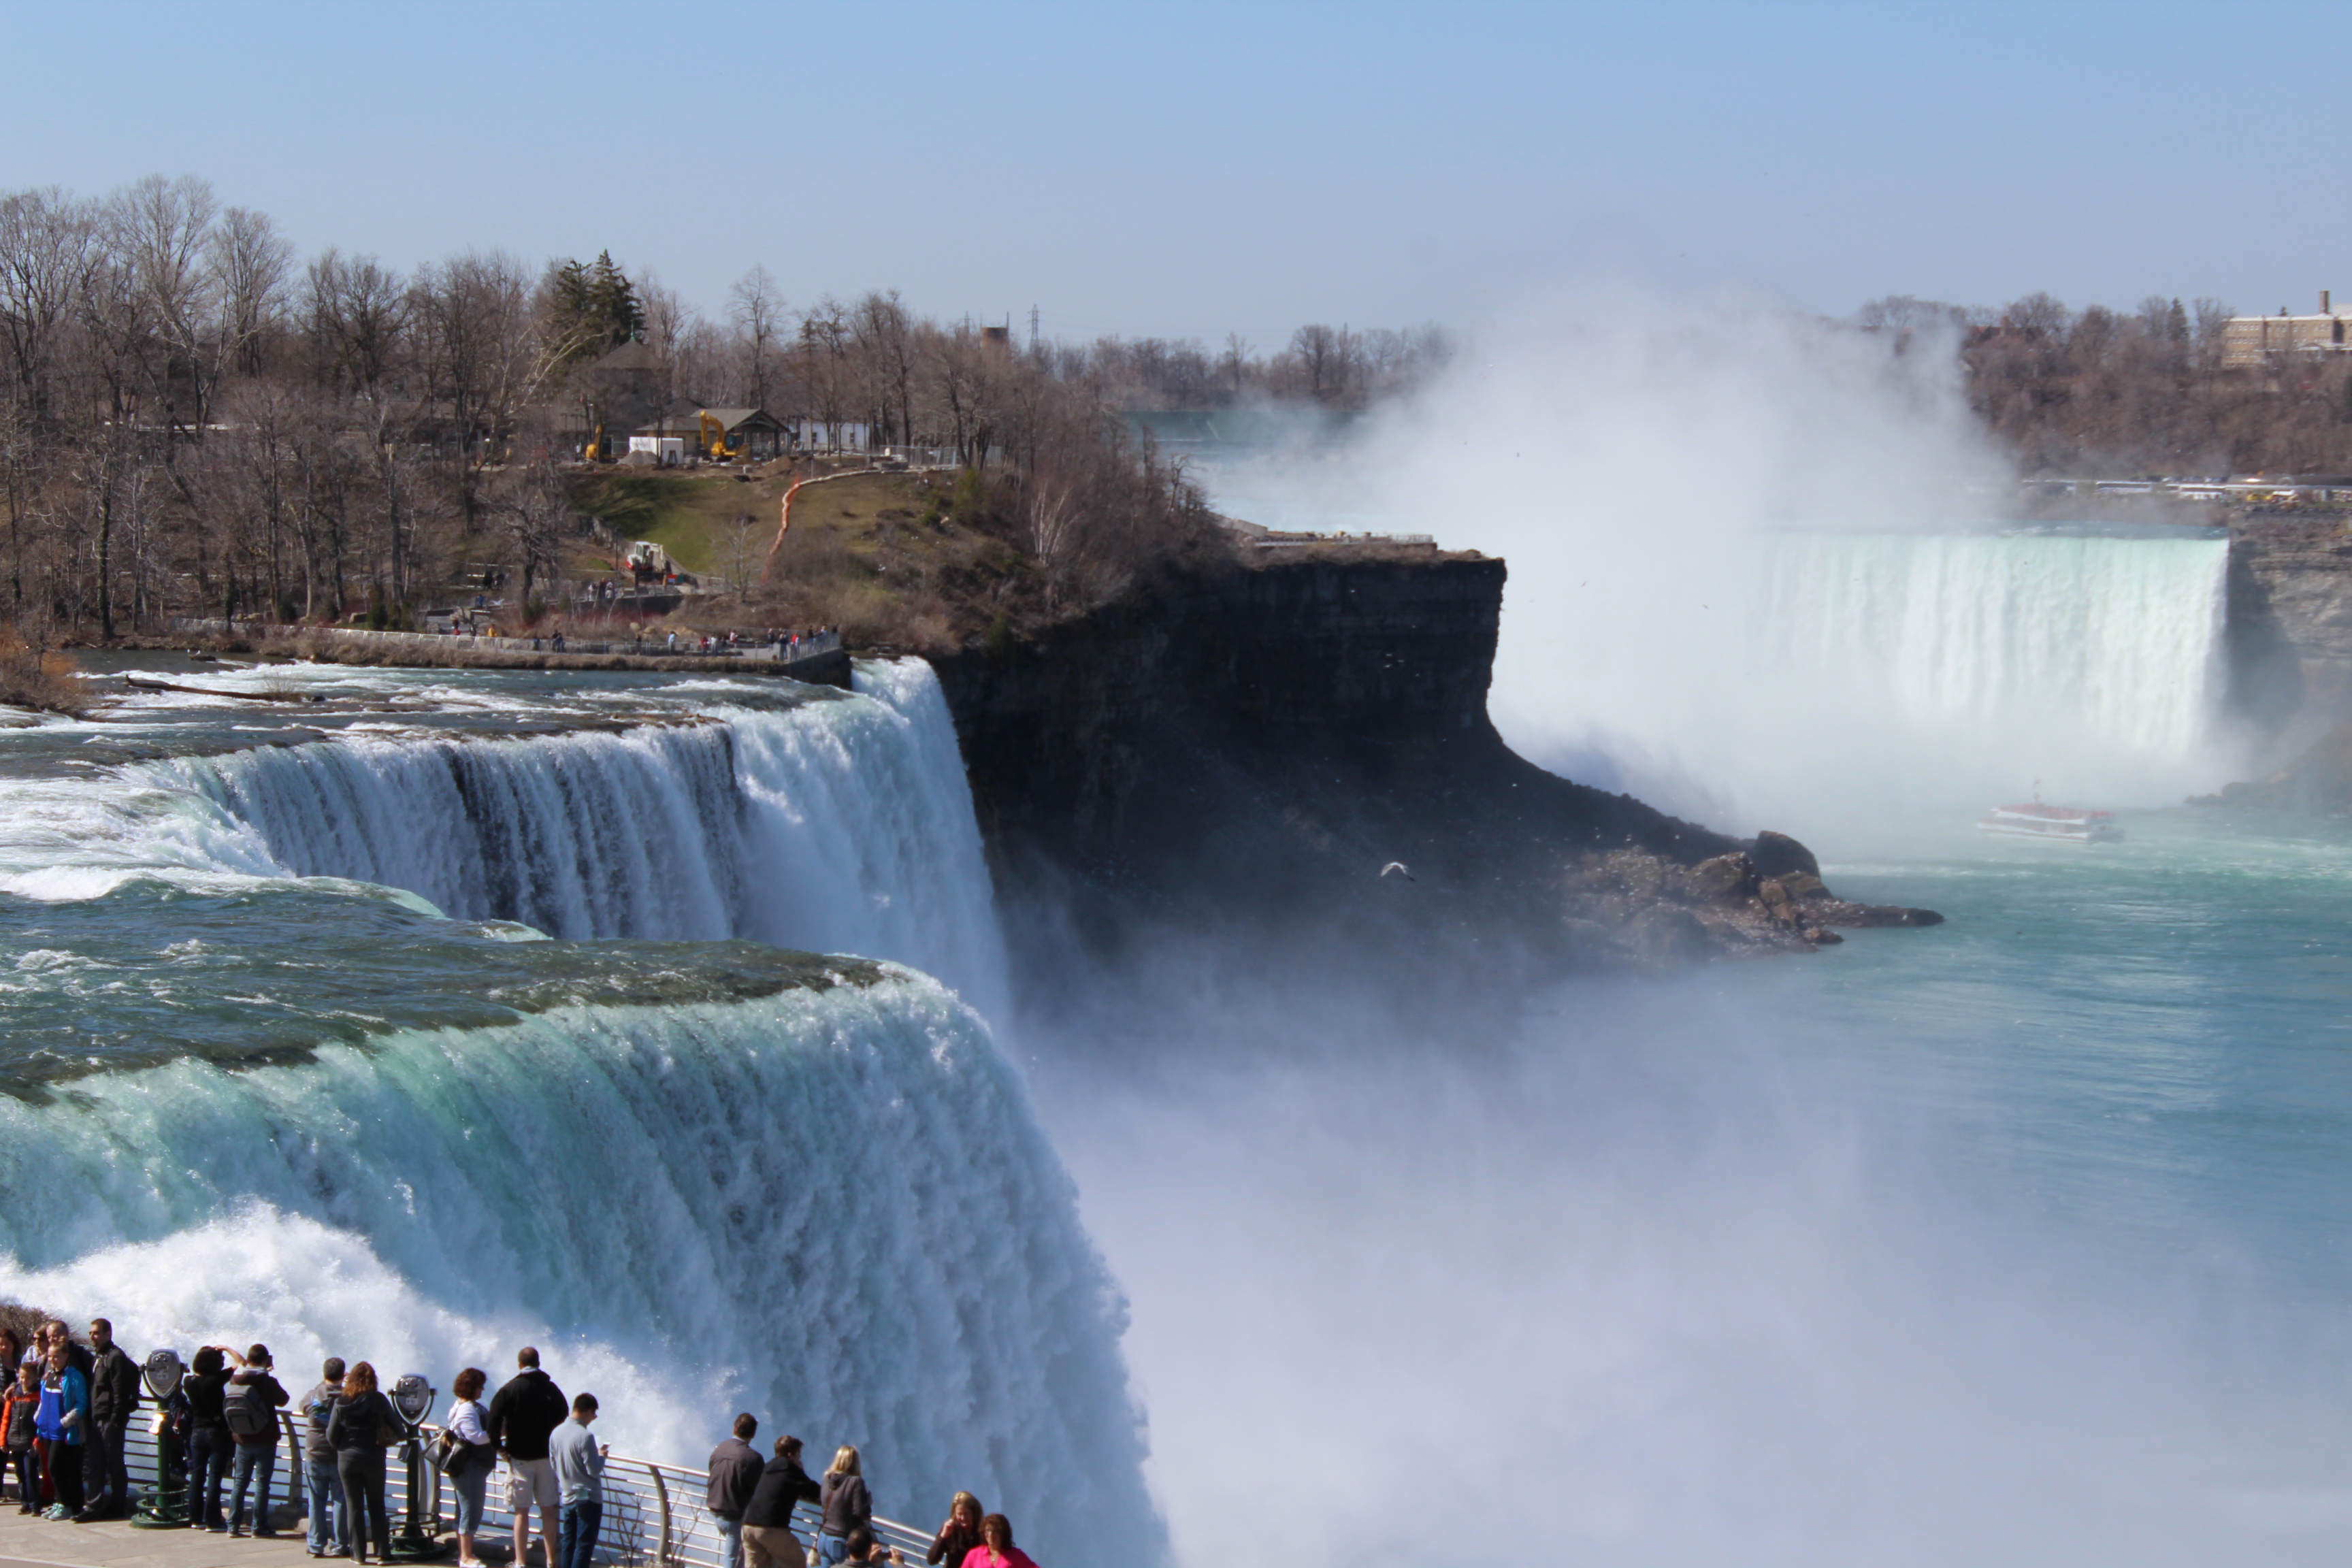 View of Niagara Falls from the Maid of the Mist boarding platform